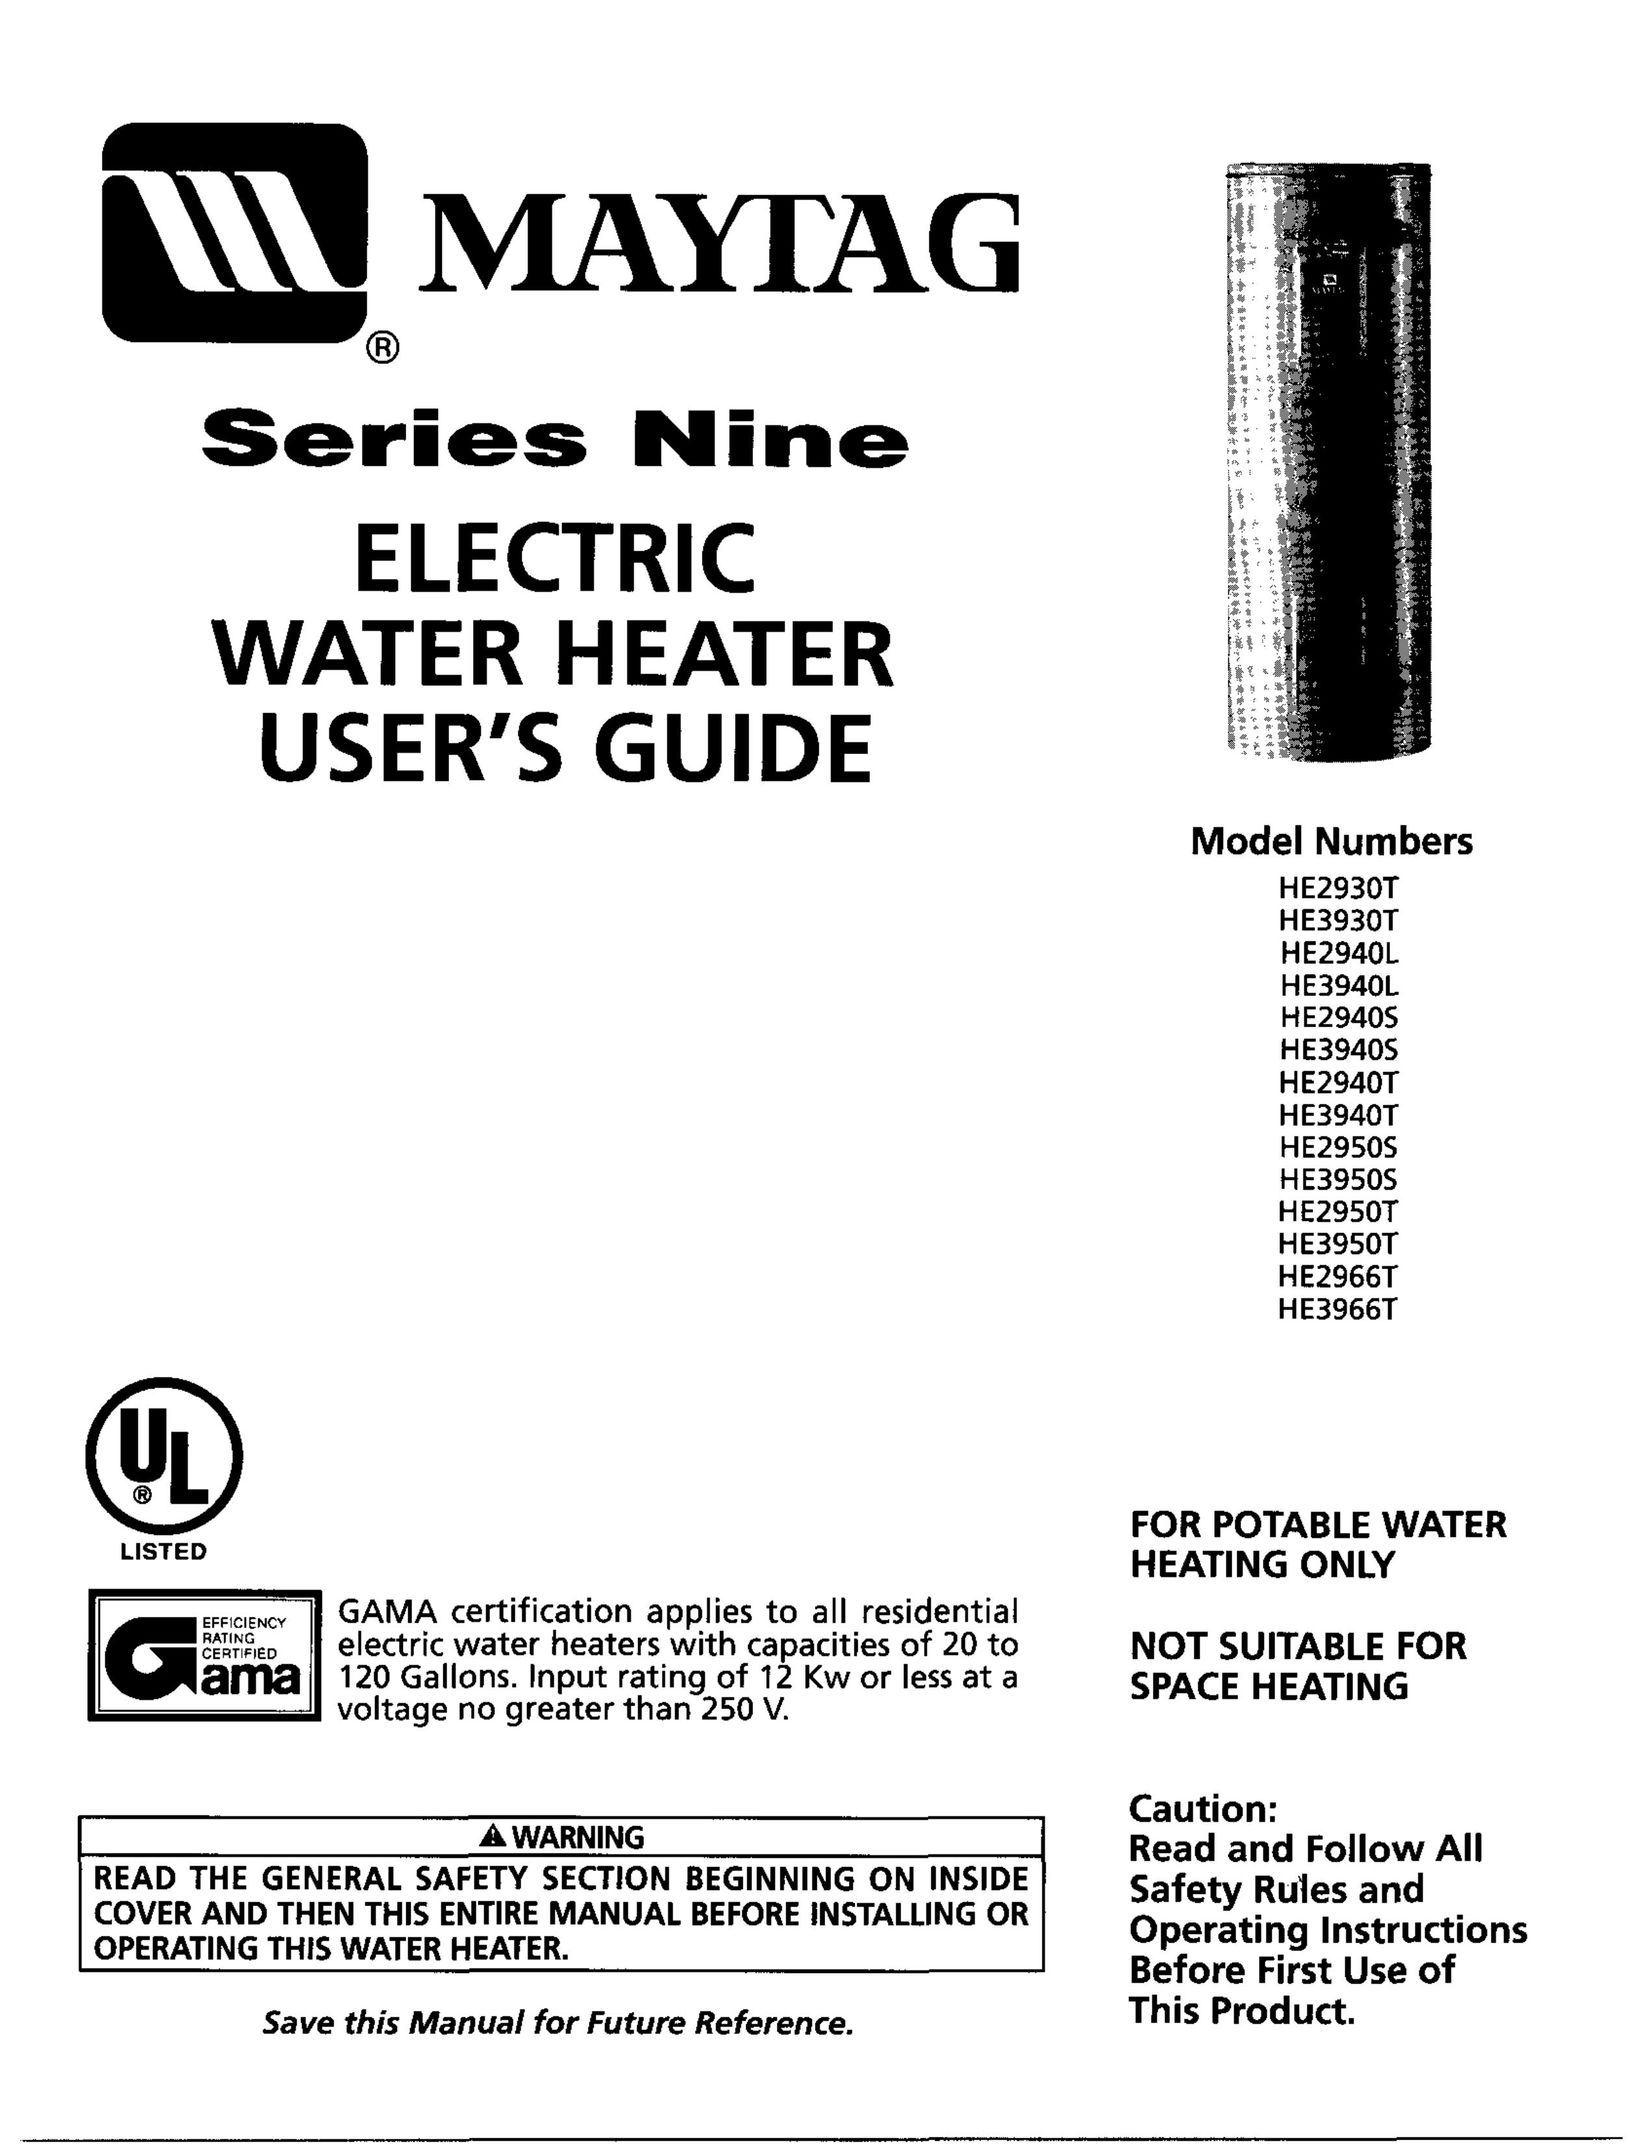 Maytag HE2950T Water Heater User Manual